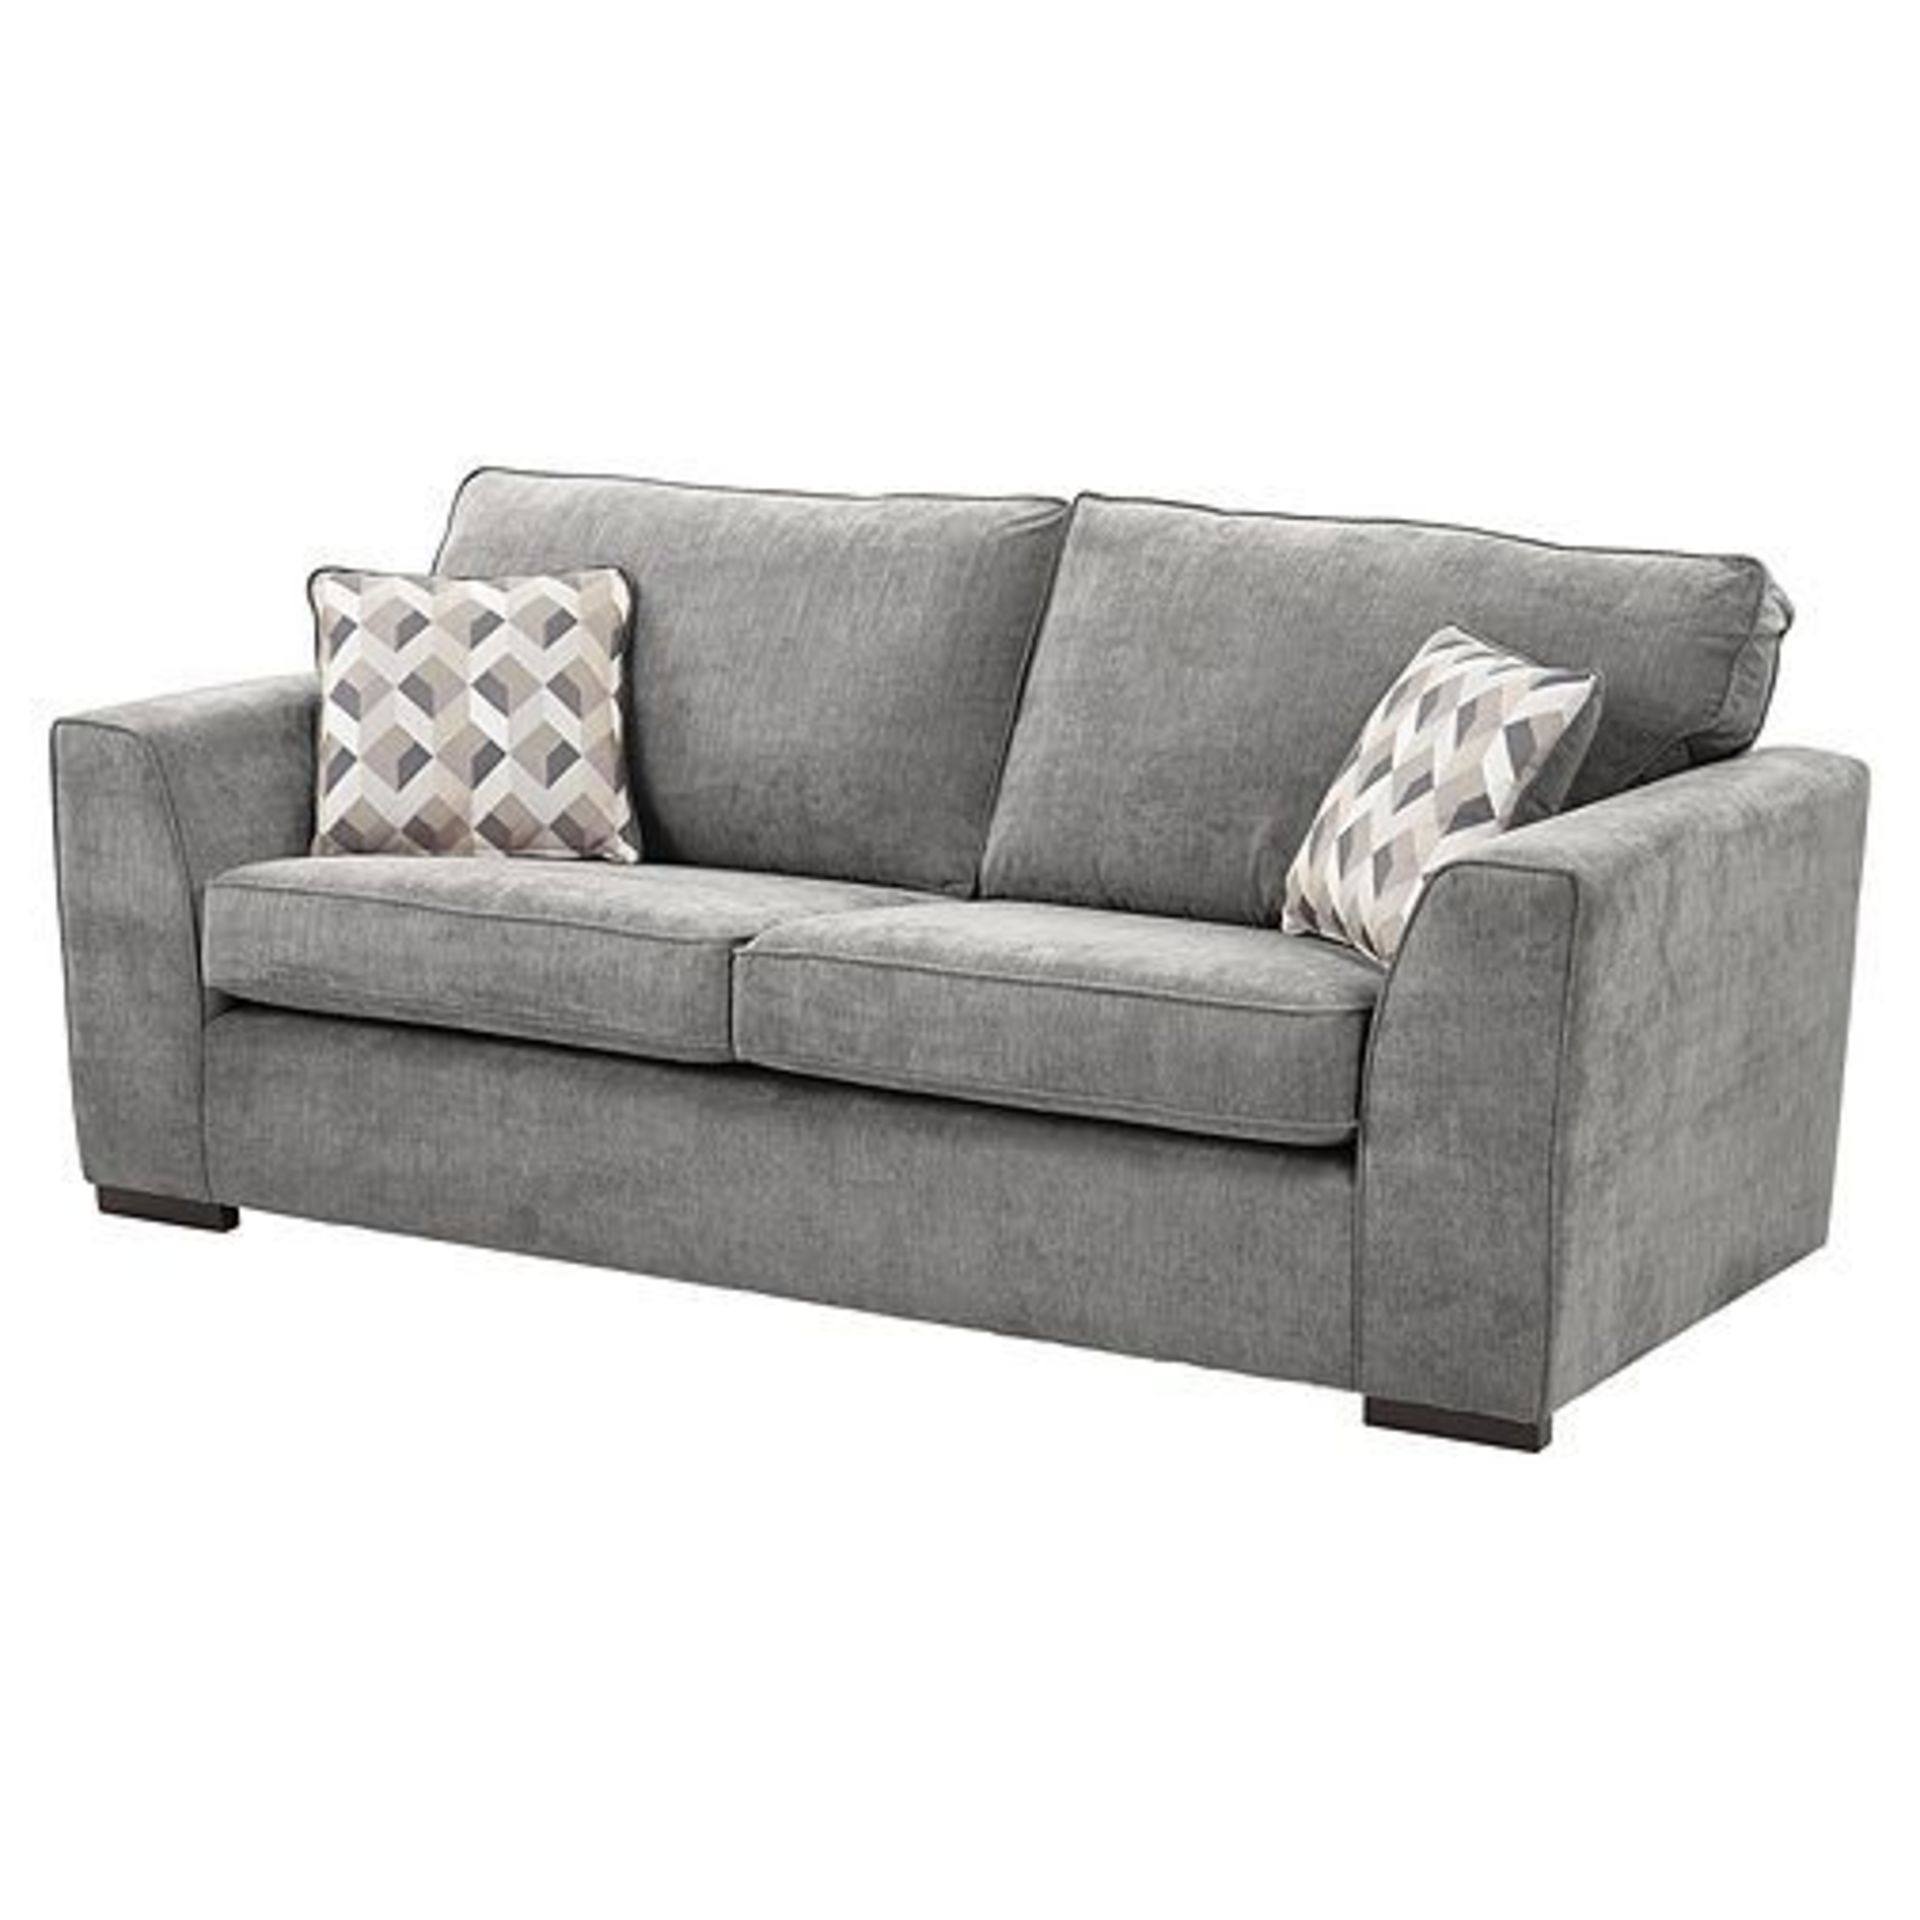 1 BRAND NEW BAGGED MEDIUM 2.5 SEATER SOFA IN DARK GREY / 42592 (VIEWING HIGHLY RECOMMENDED)